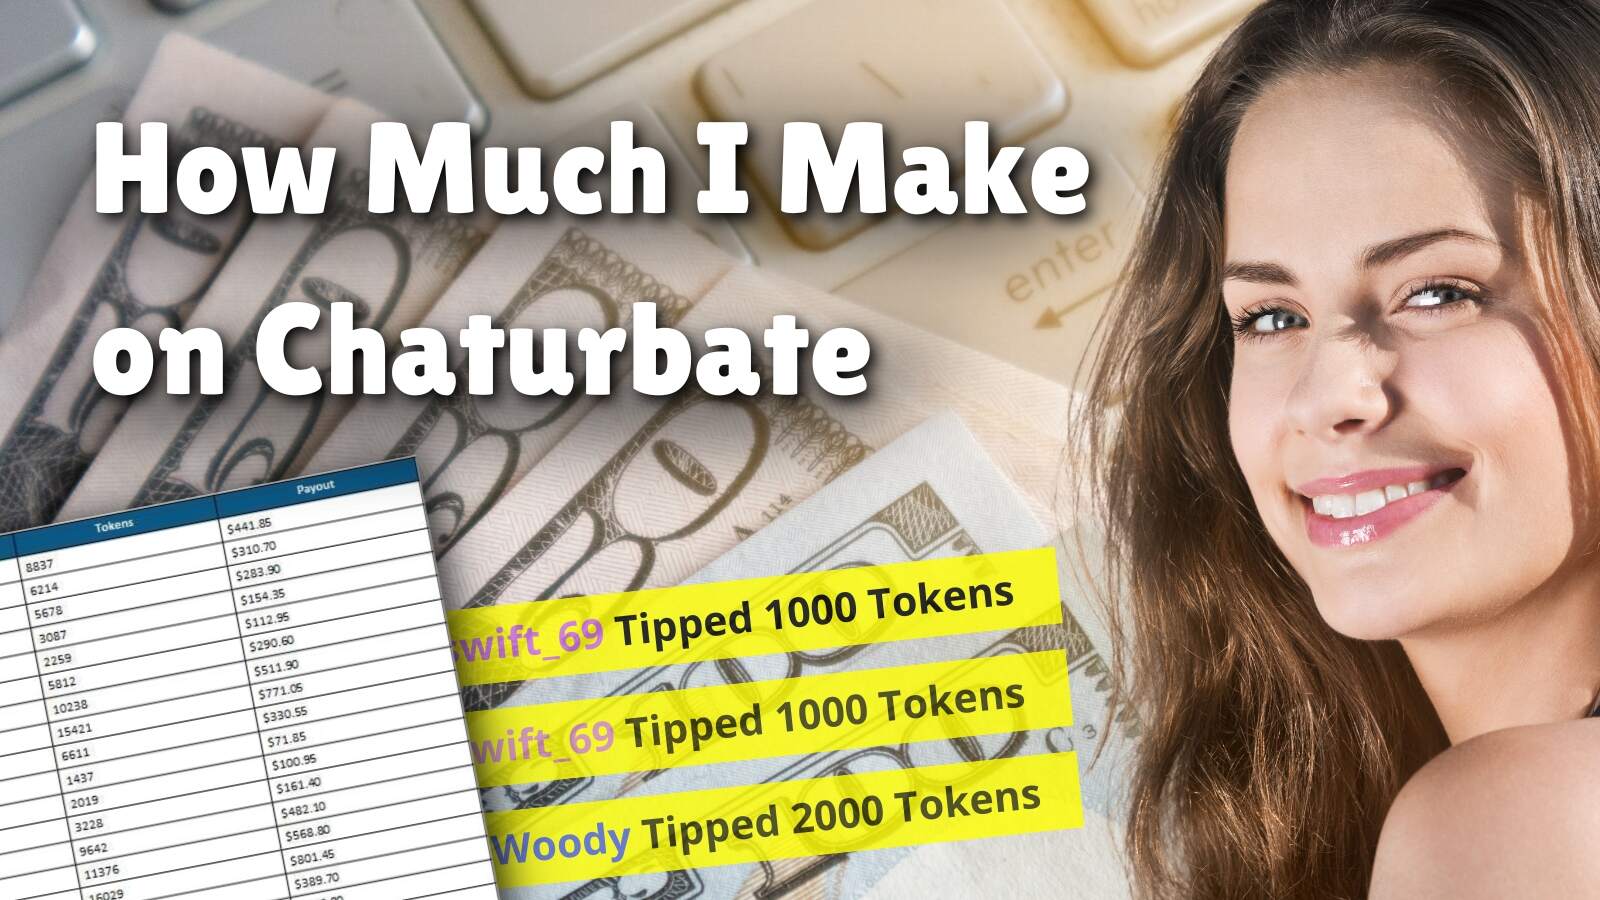 Chaturbate Earnings Revealed: Success Stories & Expert Tips